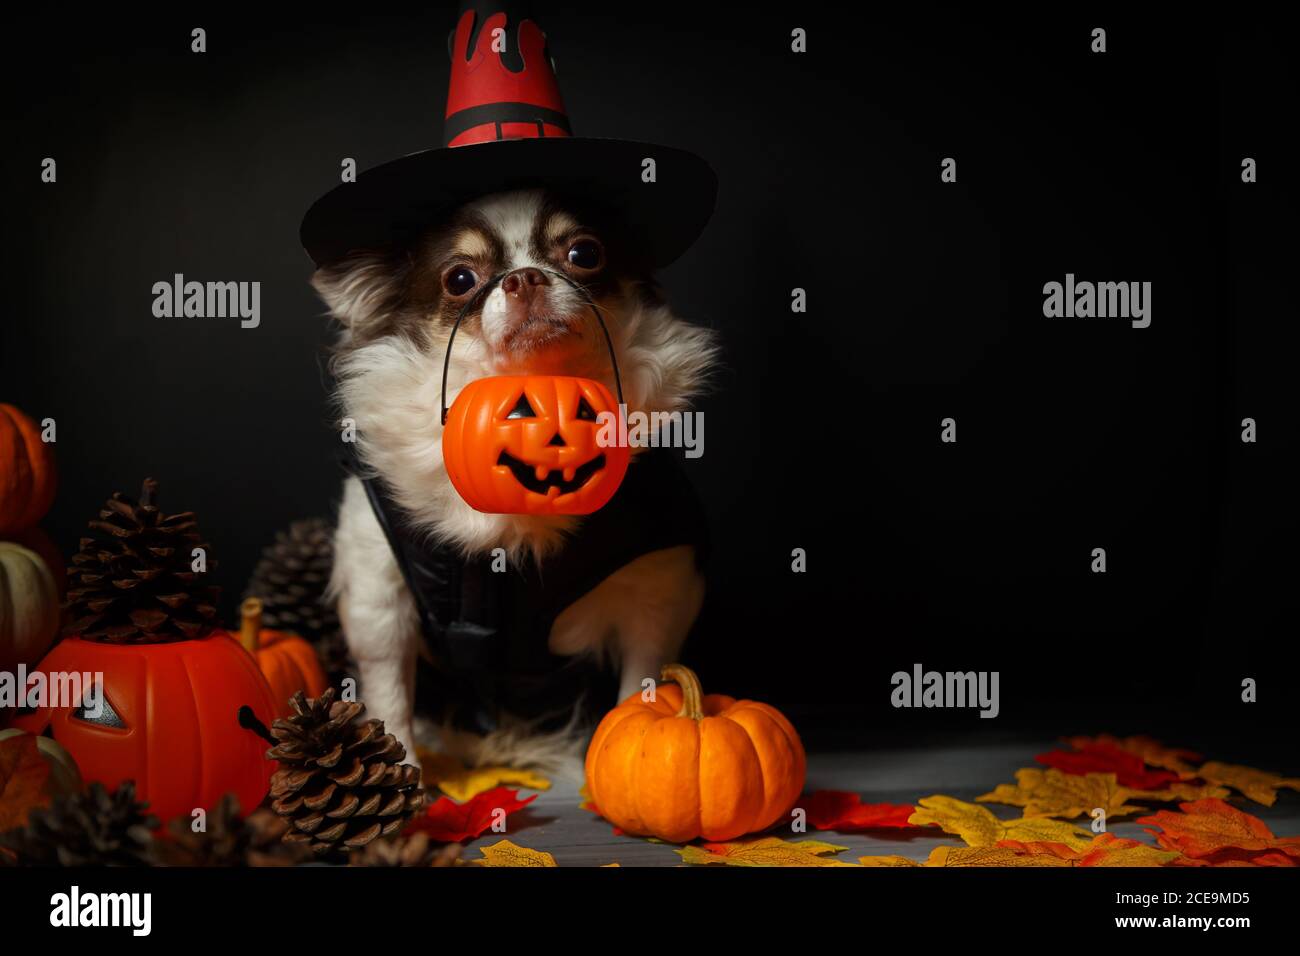 Adorable chihuahua dog wearing a Halloween witch hat and holding a pumpkin on dark background. Stock Photo